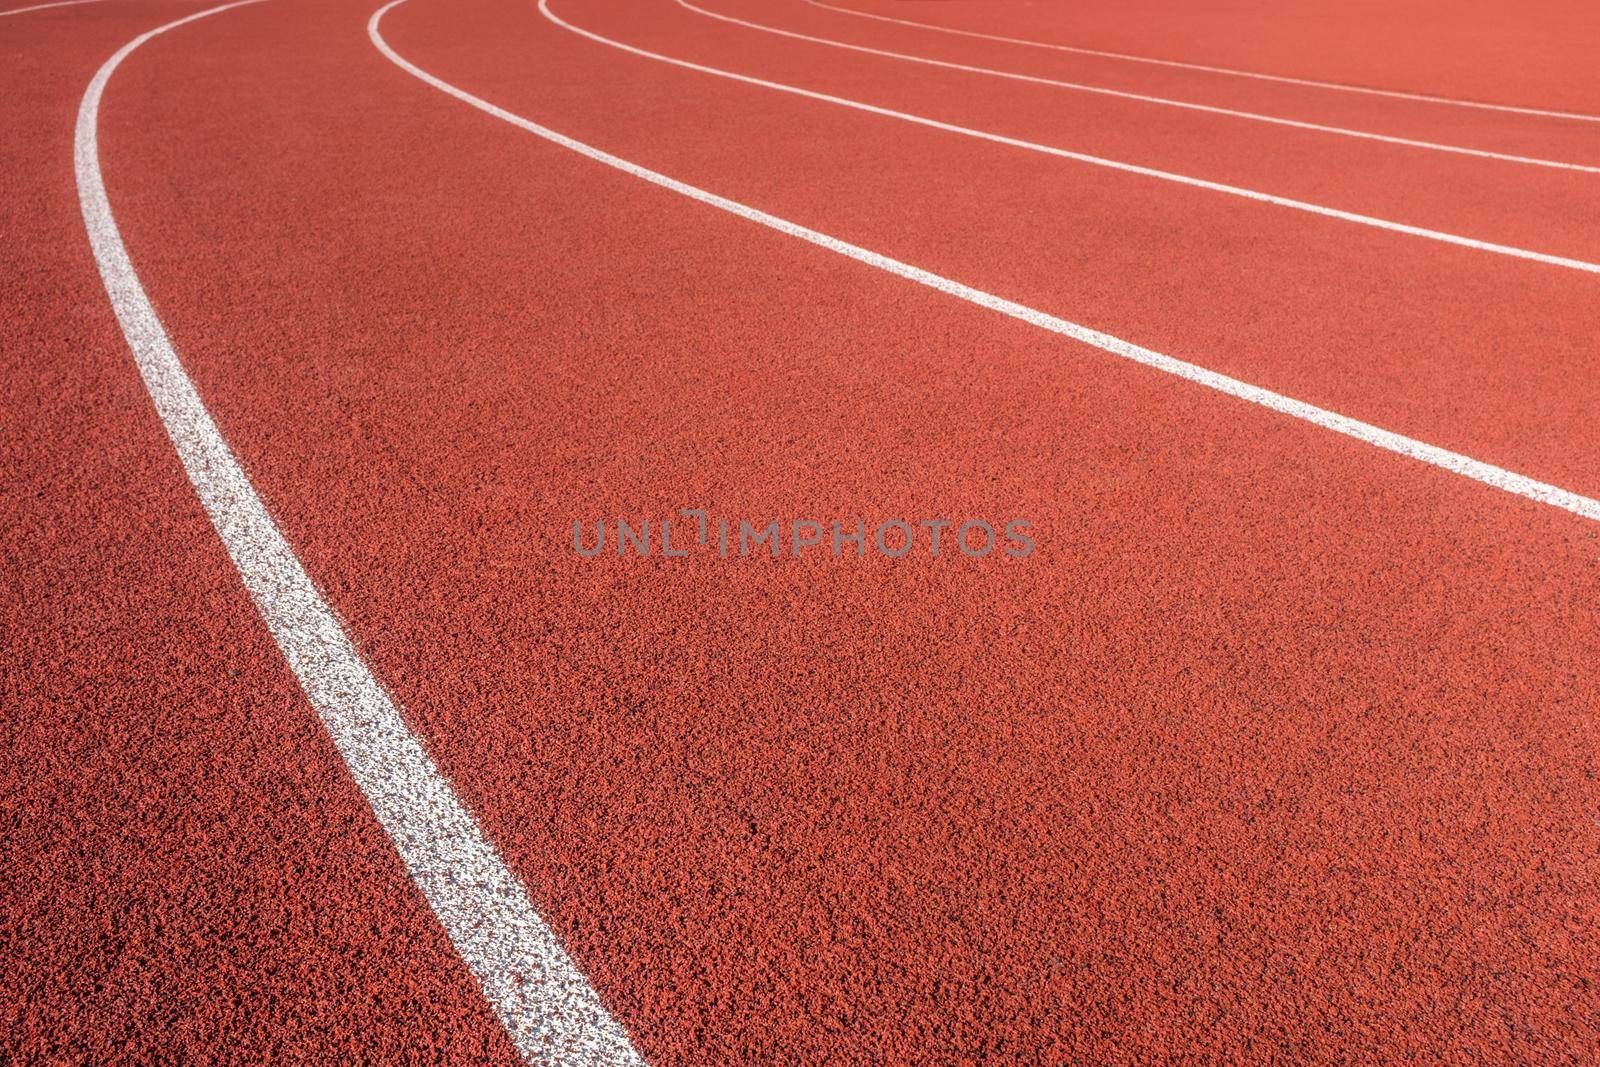 White Markings On A Red Athletic Race Track In A Sports Stadium